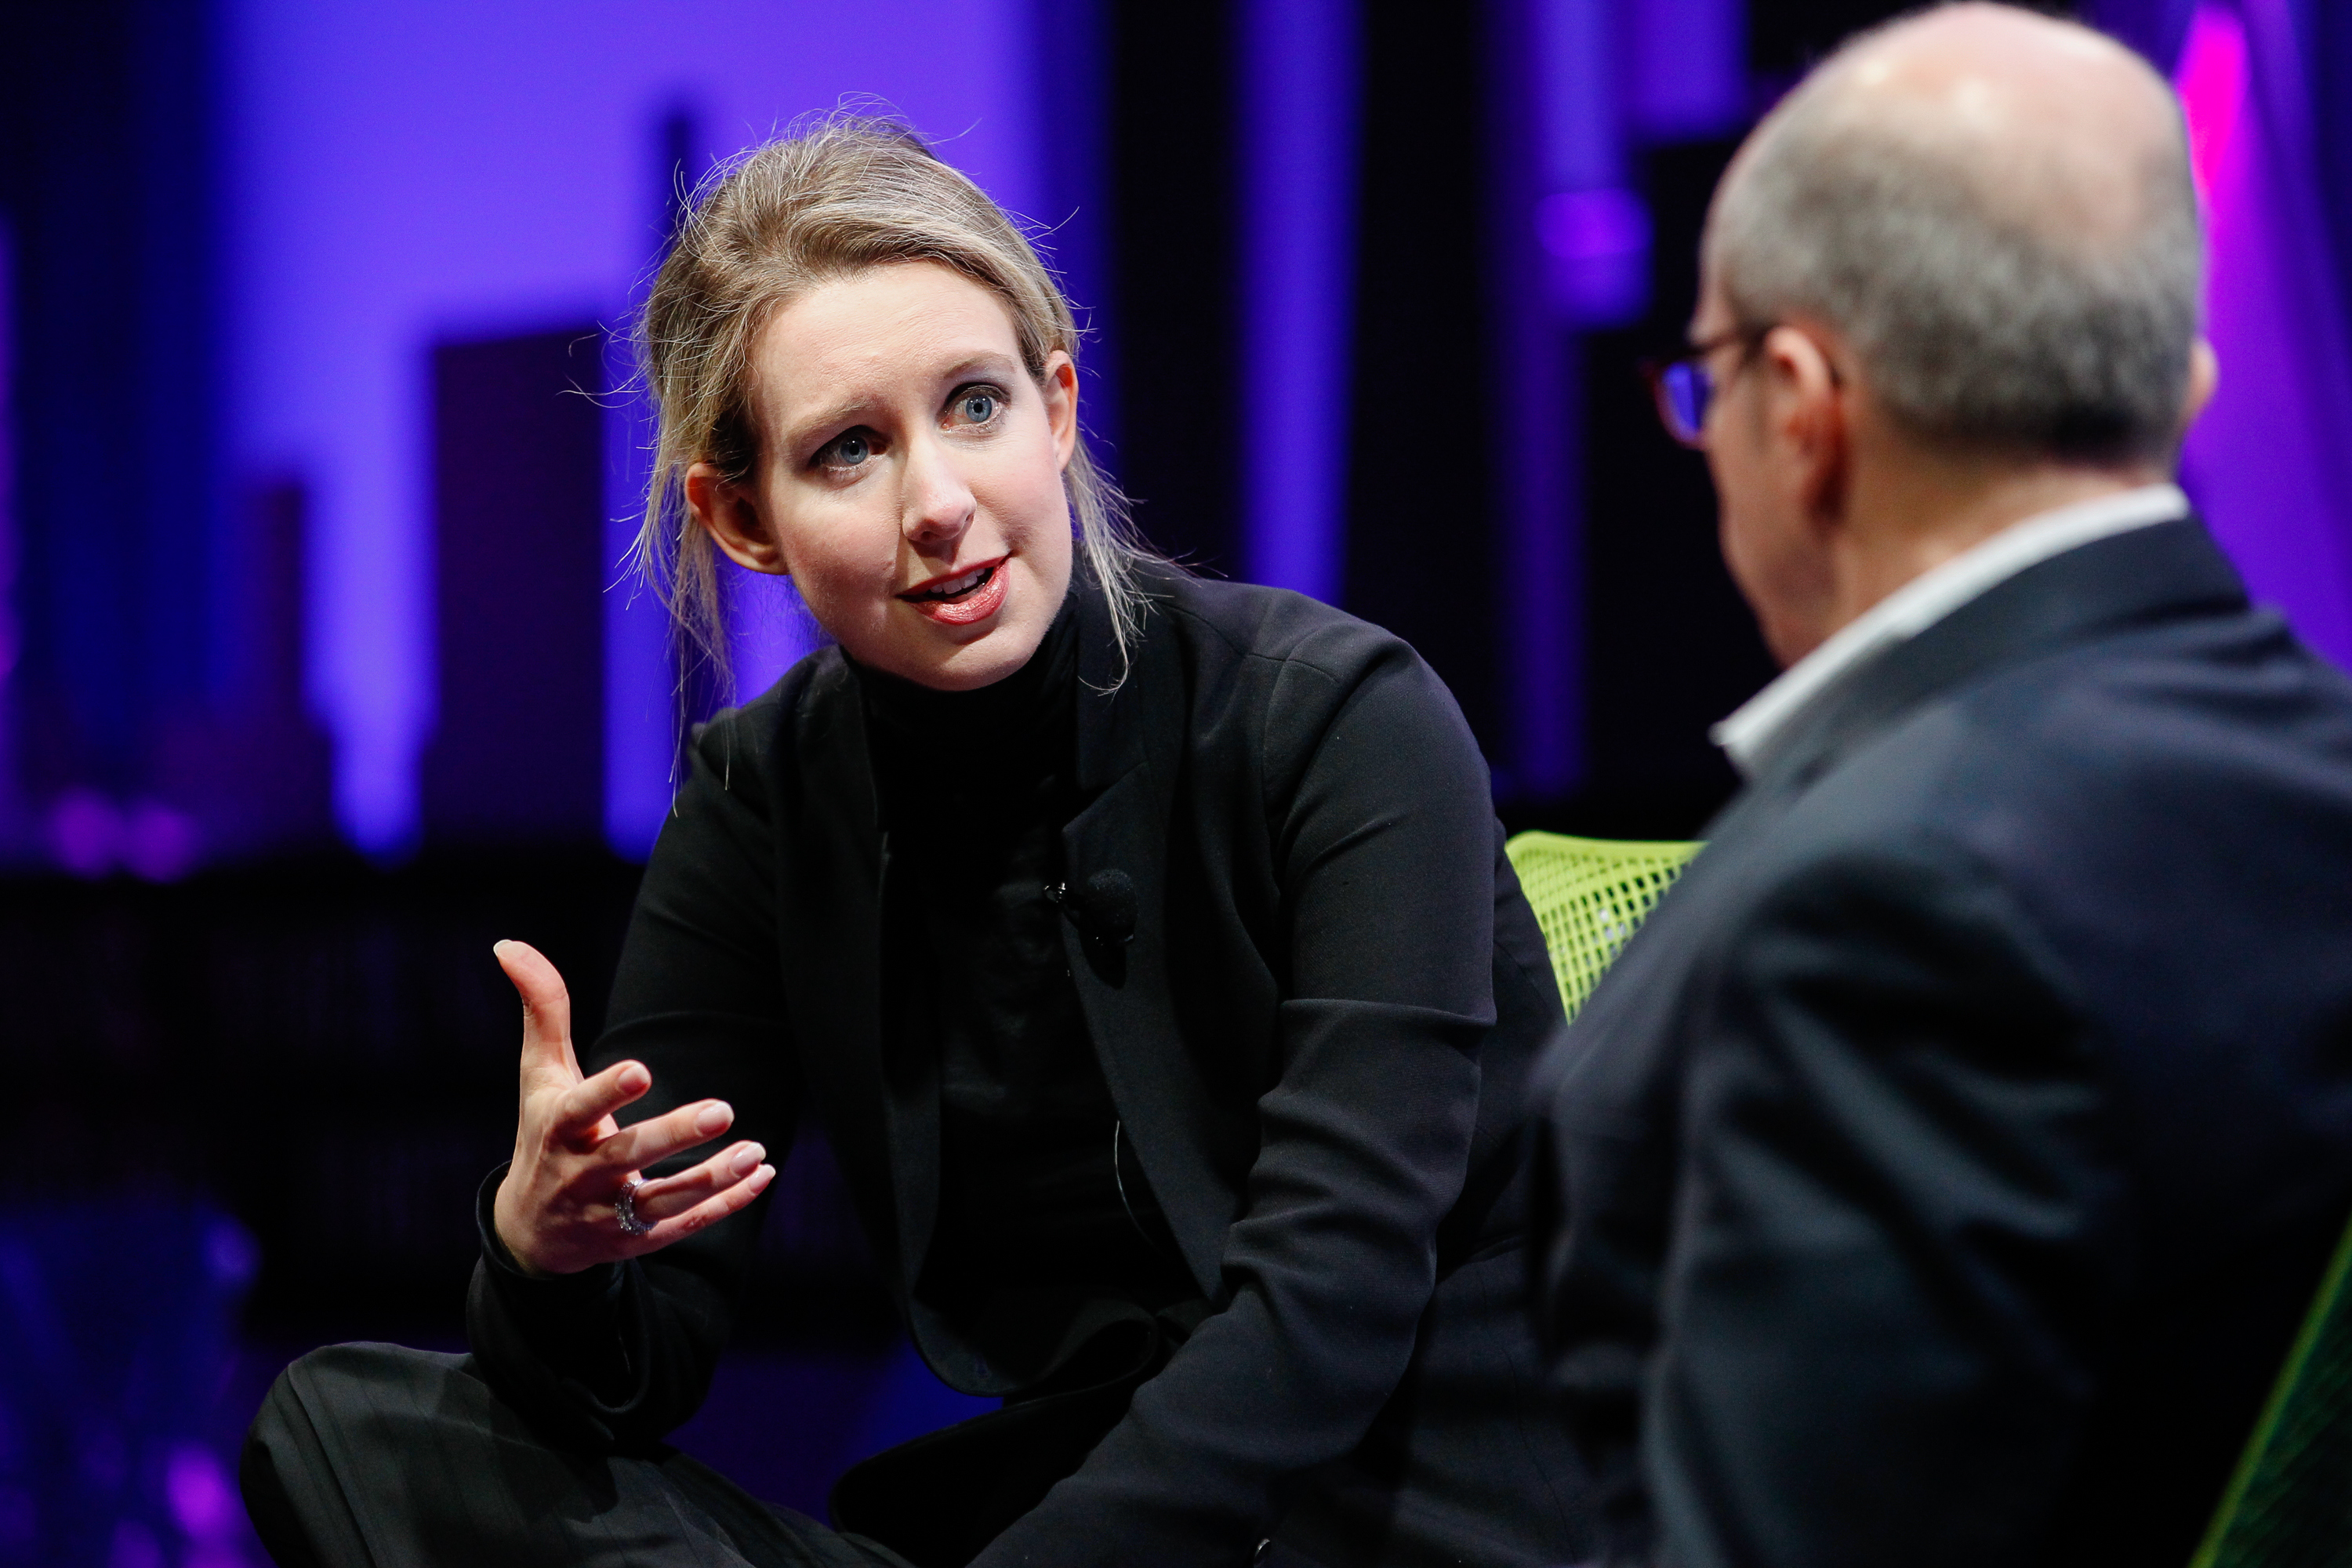 Elizabeth Holmes (L) and Alan Murray speak at the Fortune Global Forum at the Fairmont Hotel on November 2, 2015 in San Francisco, California. (Kimberly White/Getty Images)